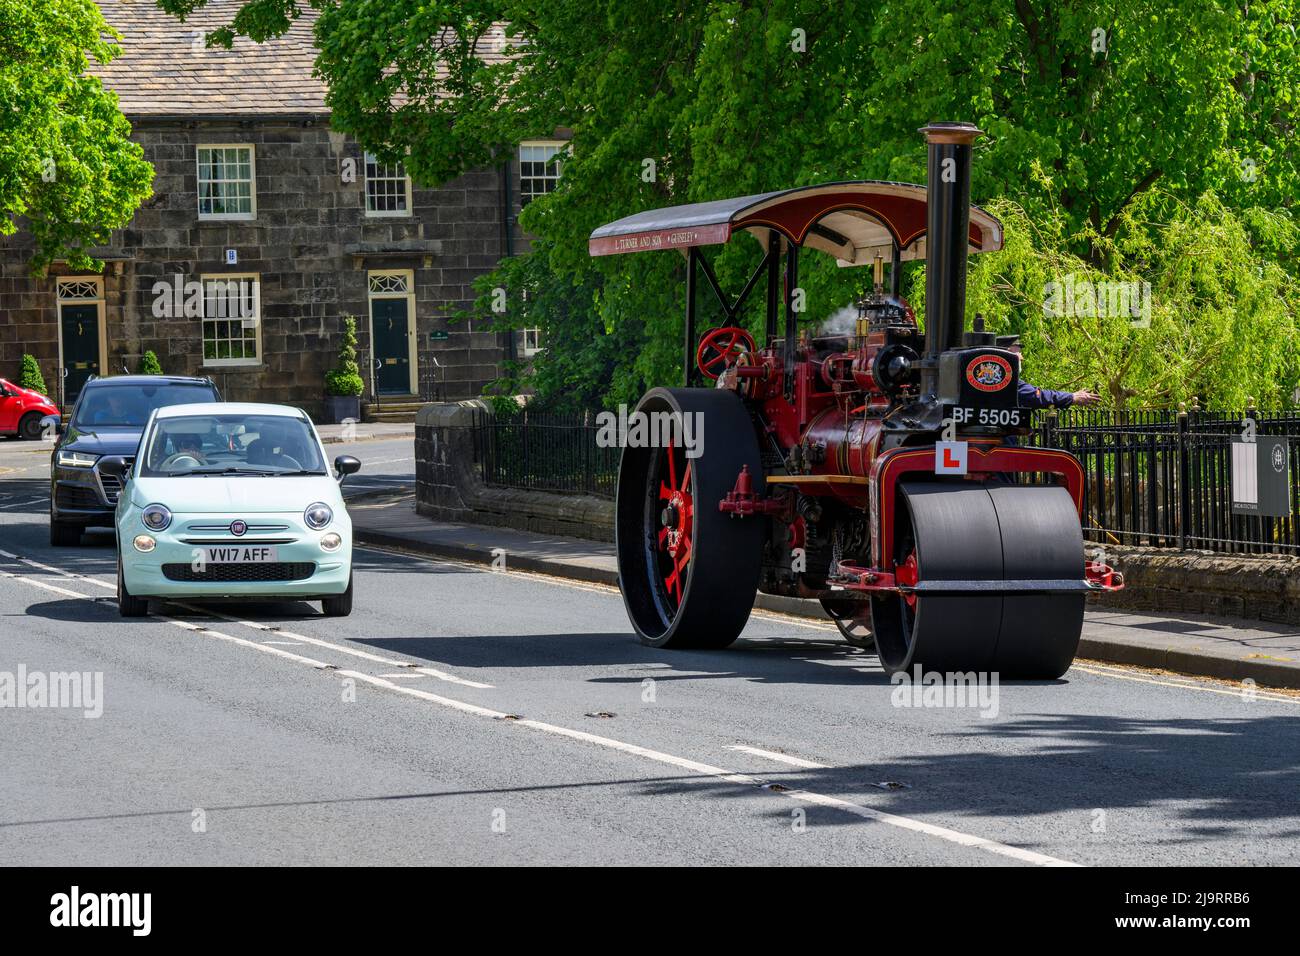 Red black stationary heavy steam-powered vehicle parked at roadside (L-plate on front) overtaken - Burley-in-Wharfedale, West Yorkshire, England, UK. Stock Photo